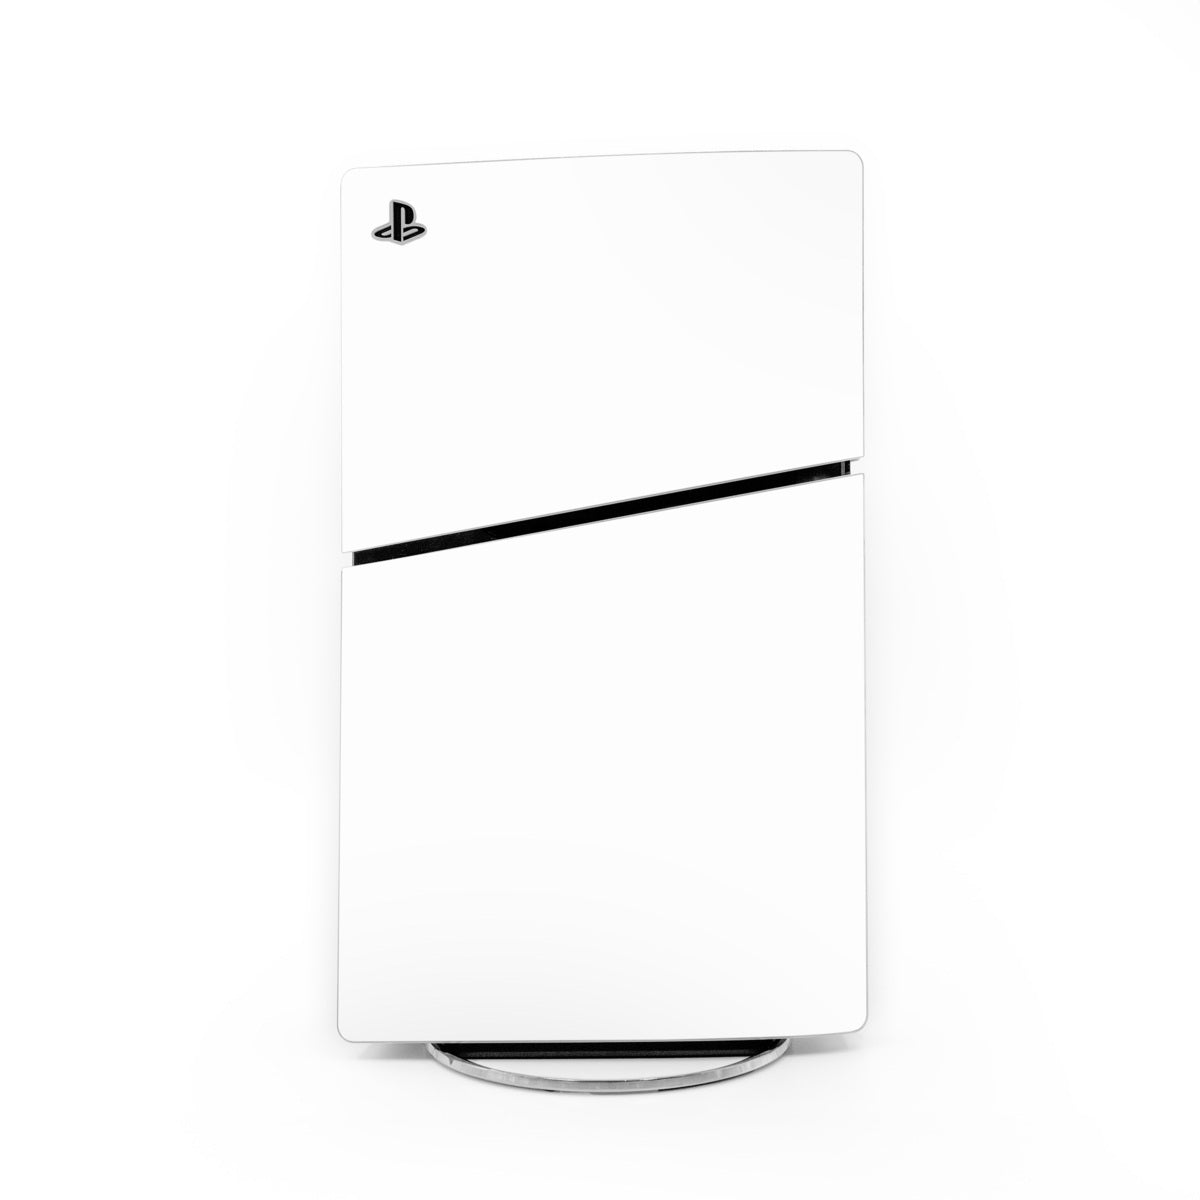 Solid State White - Sony PS5 Slim Skin